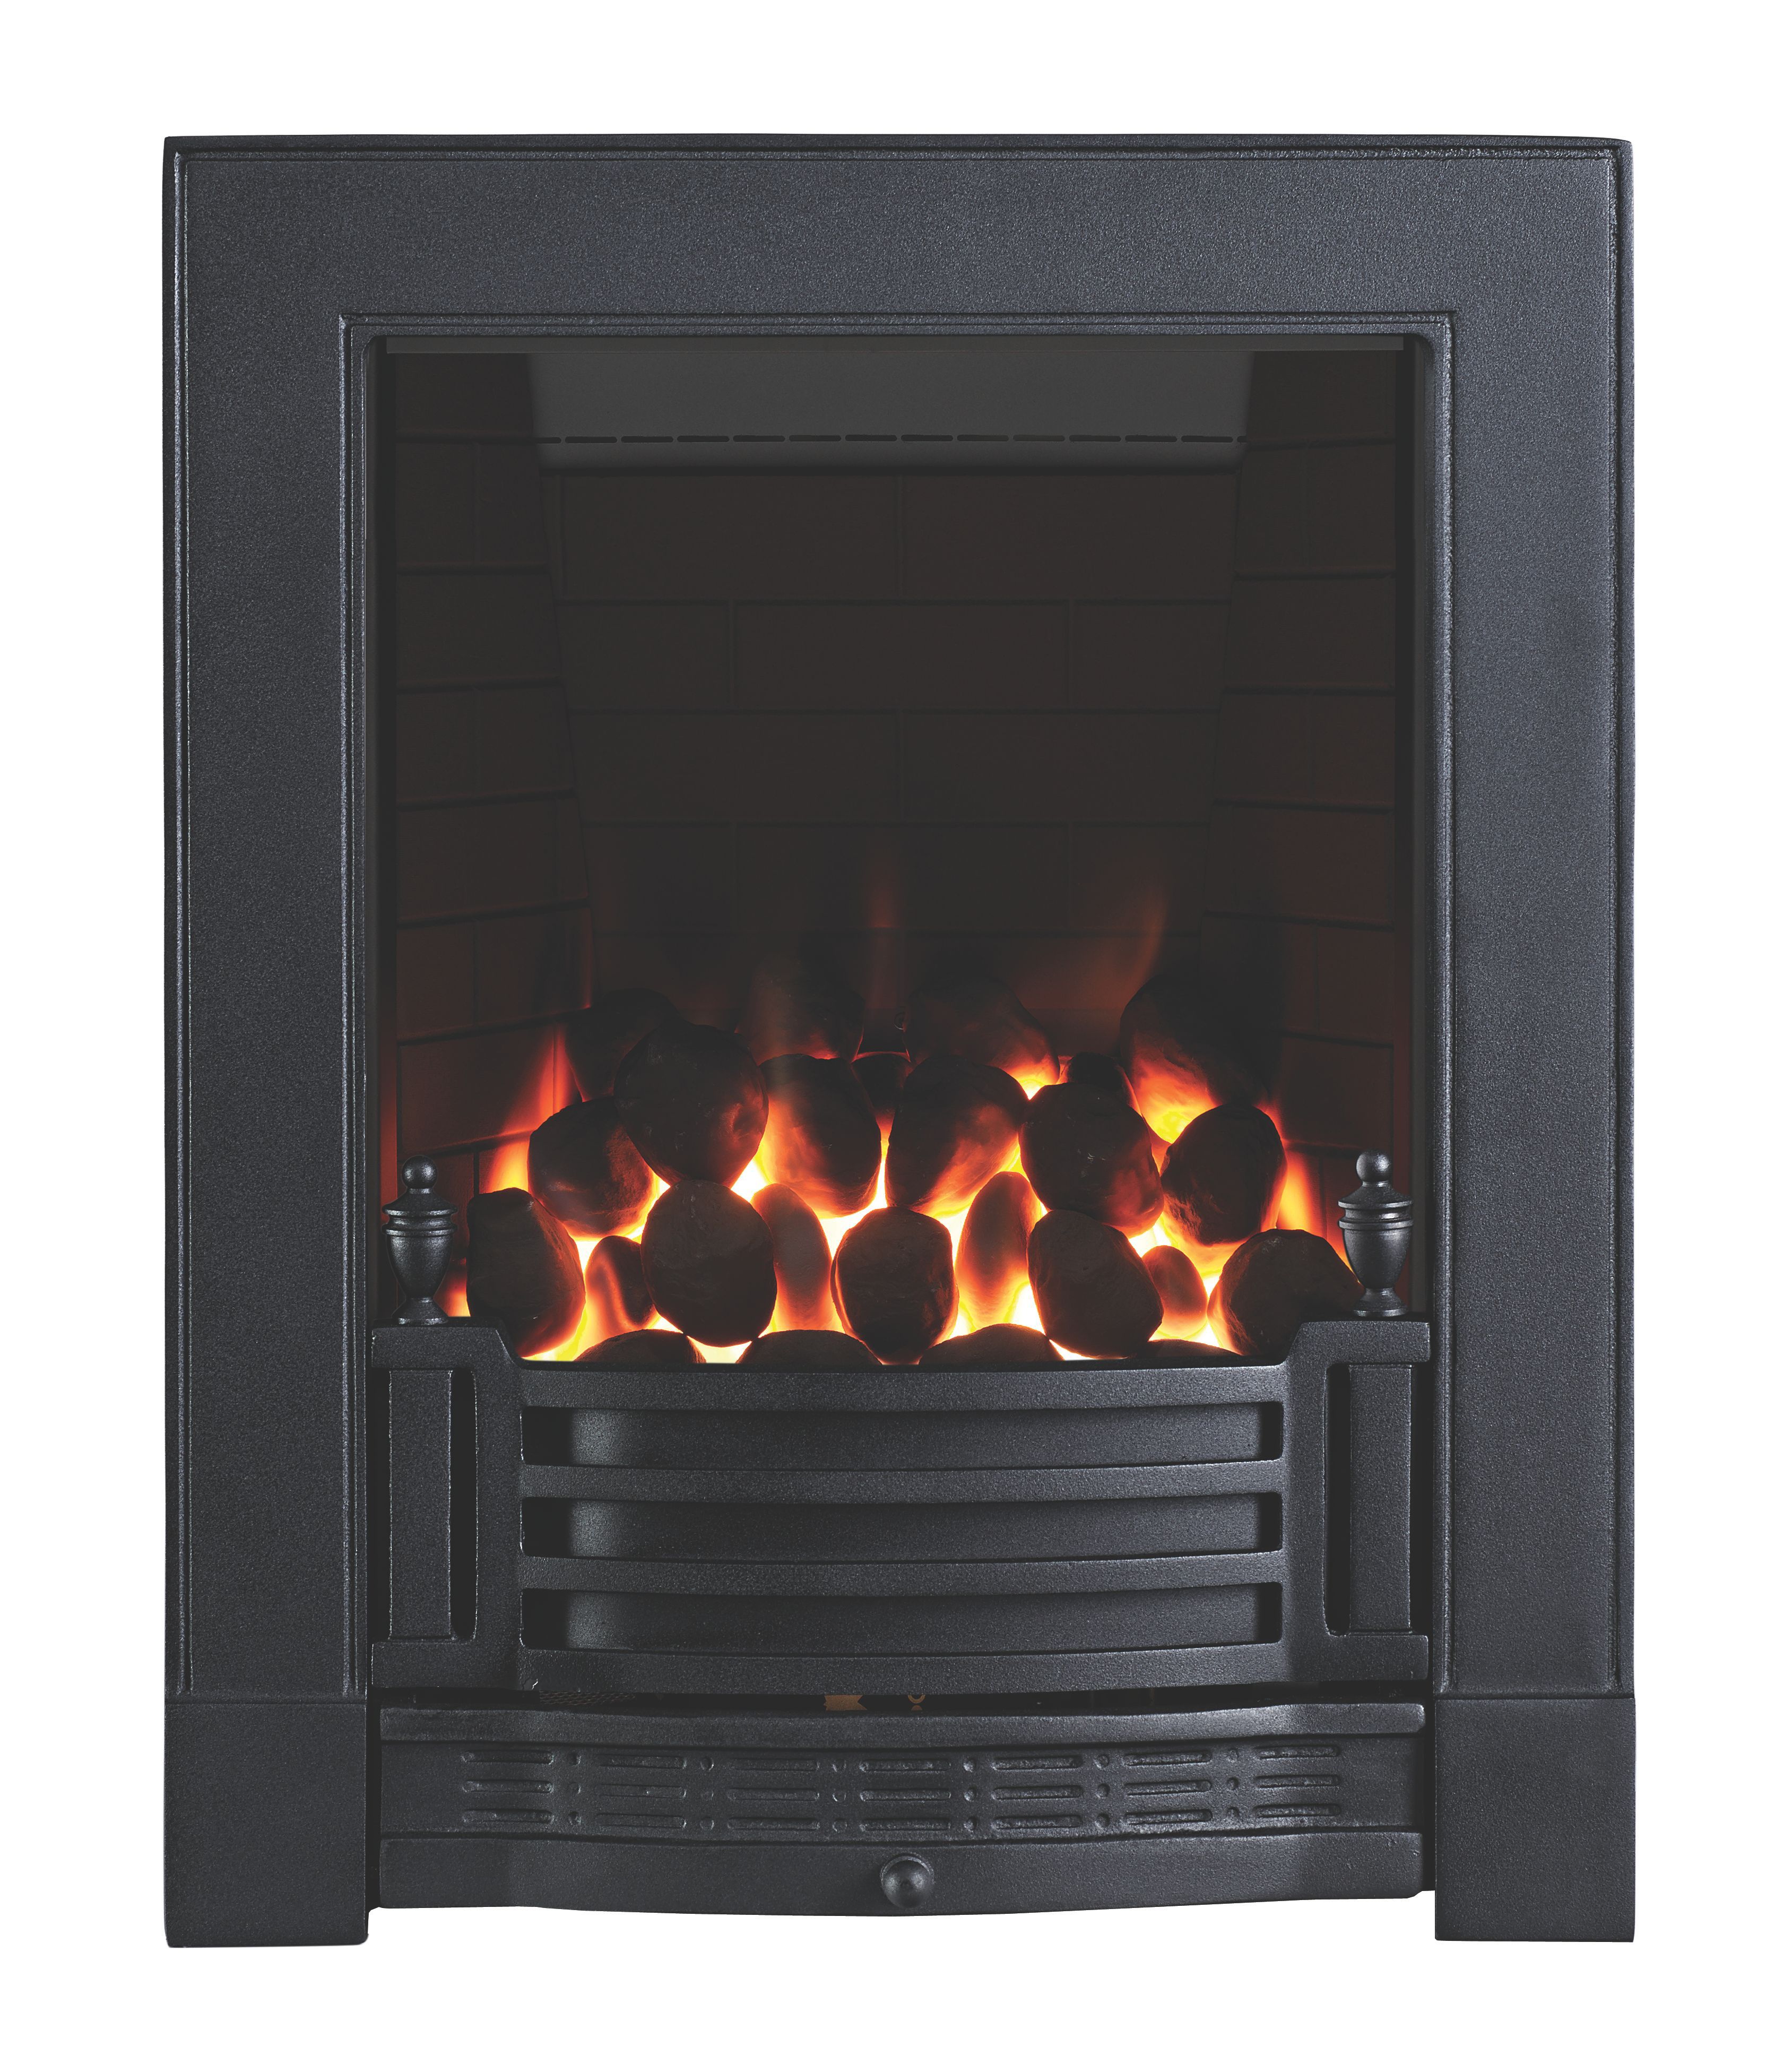 Focal Point Finsbury full depth Black Remote controlled Gas Fire